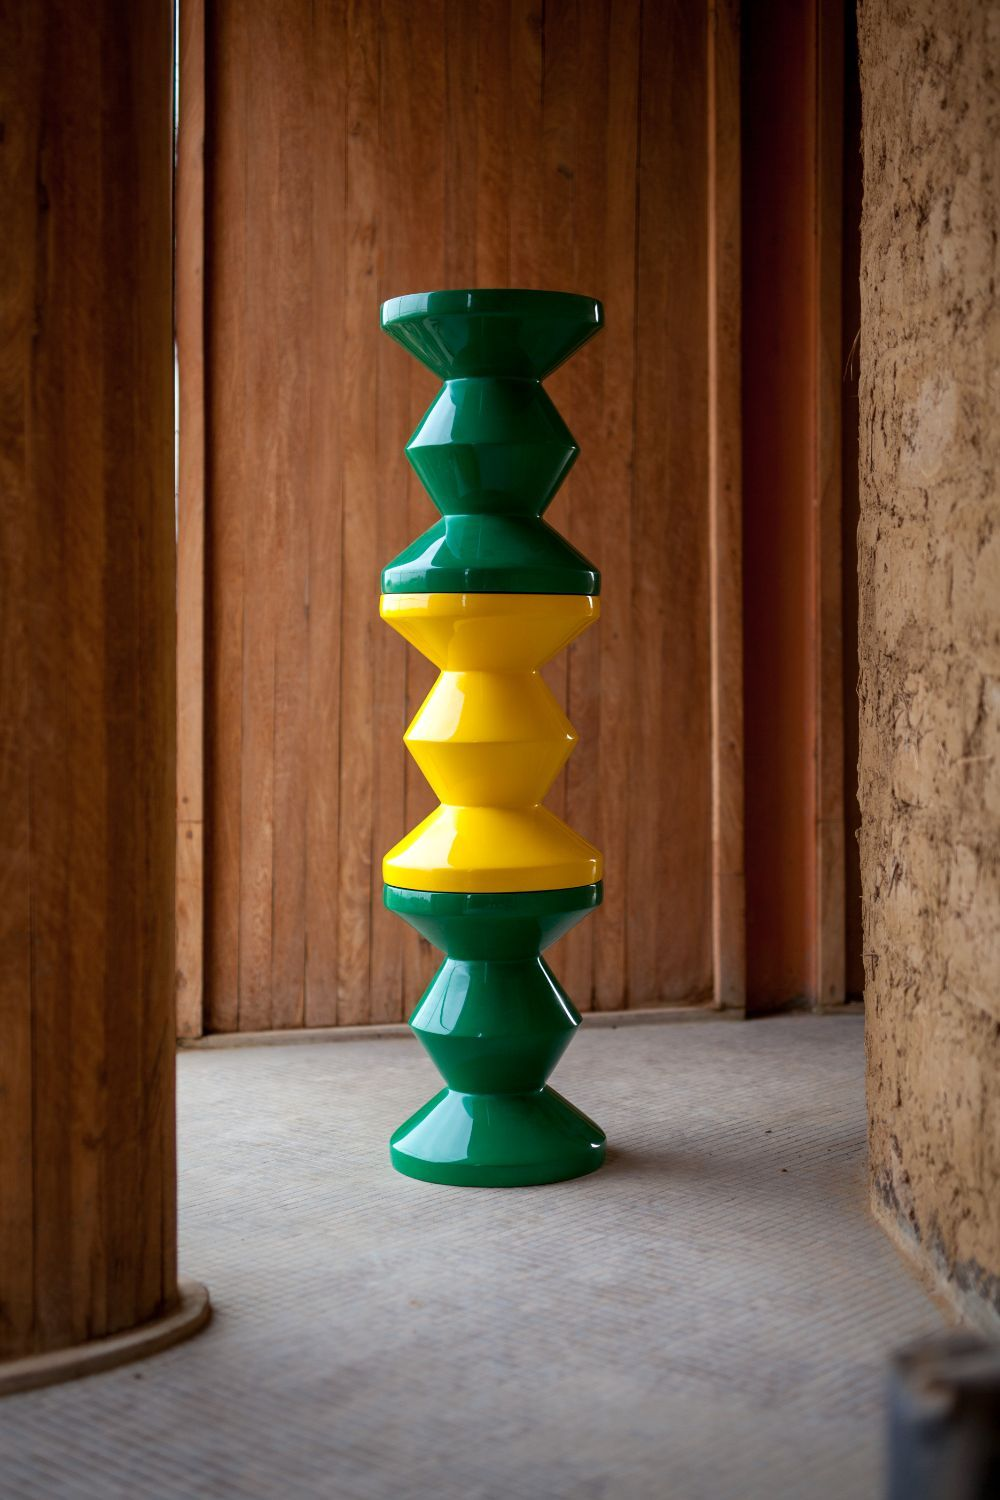 Yellow Lacquered Accent Stool | Pols Potten Zig Zag